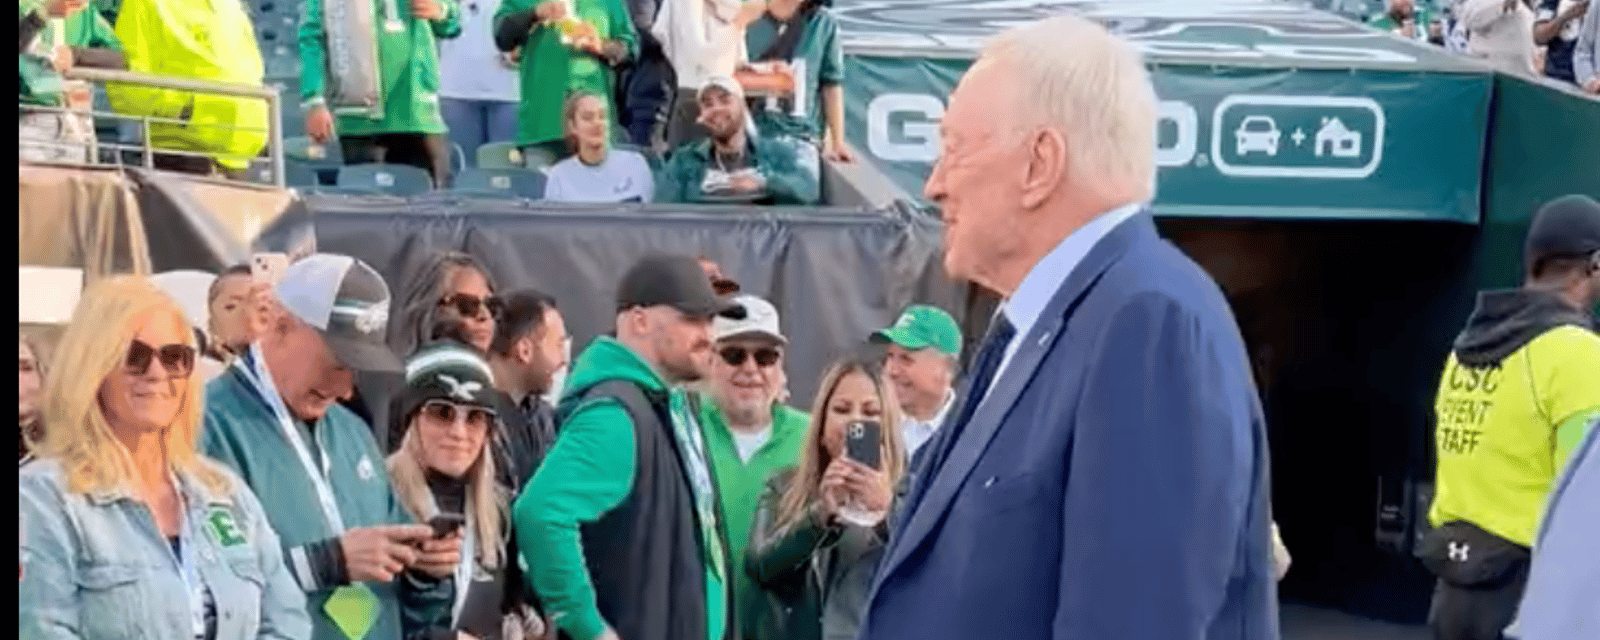 VIDEO: Jerry Jones interacts with Eagles fans